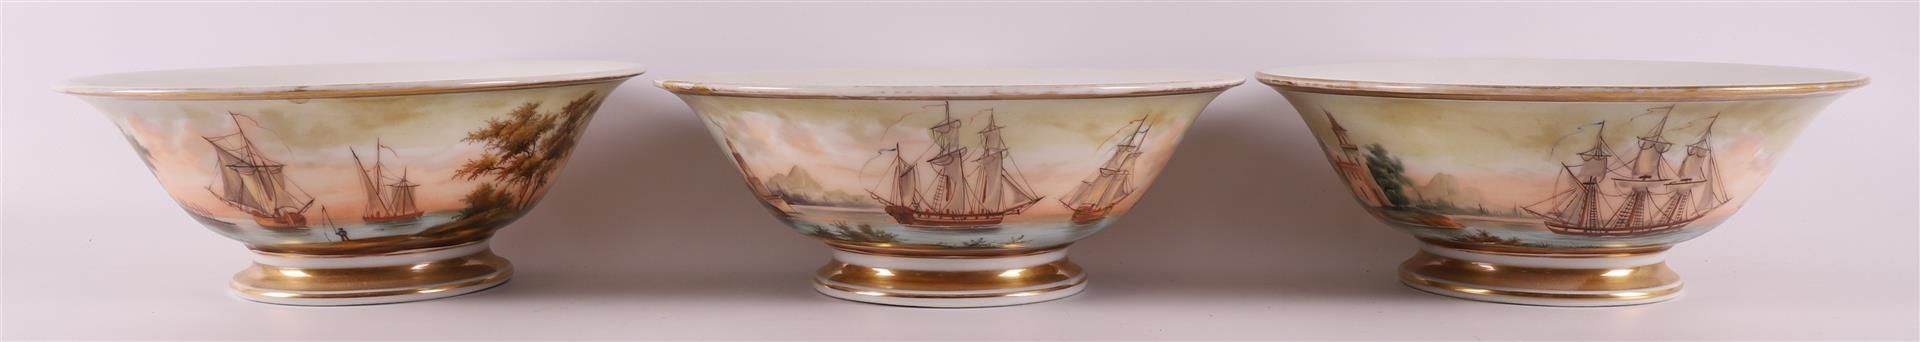 A series of three porcelain bowls, 19th century. - Image 2 of 7